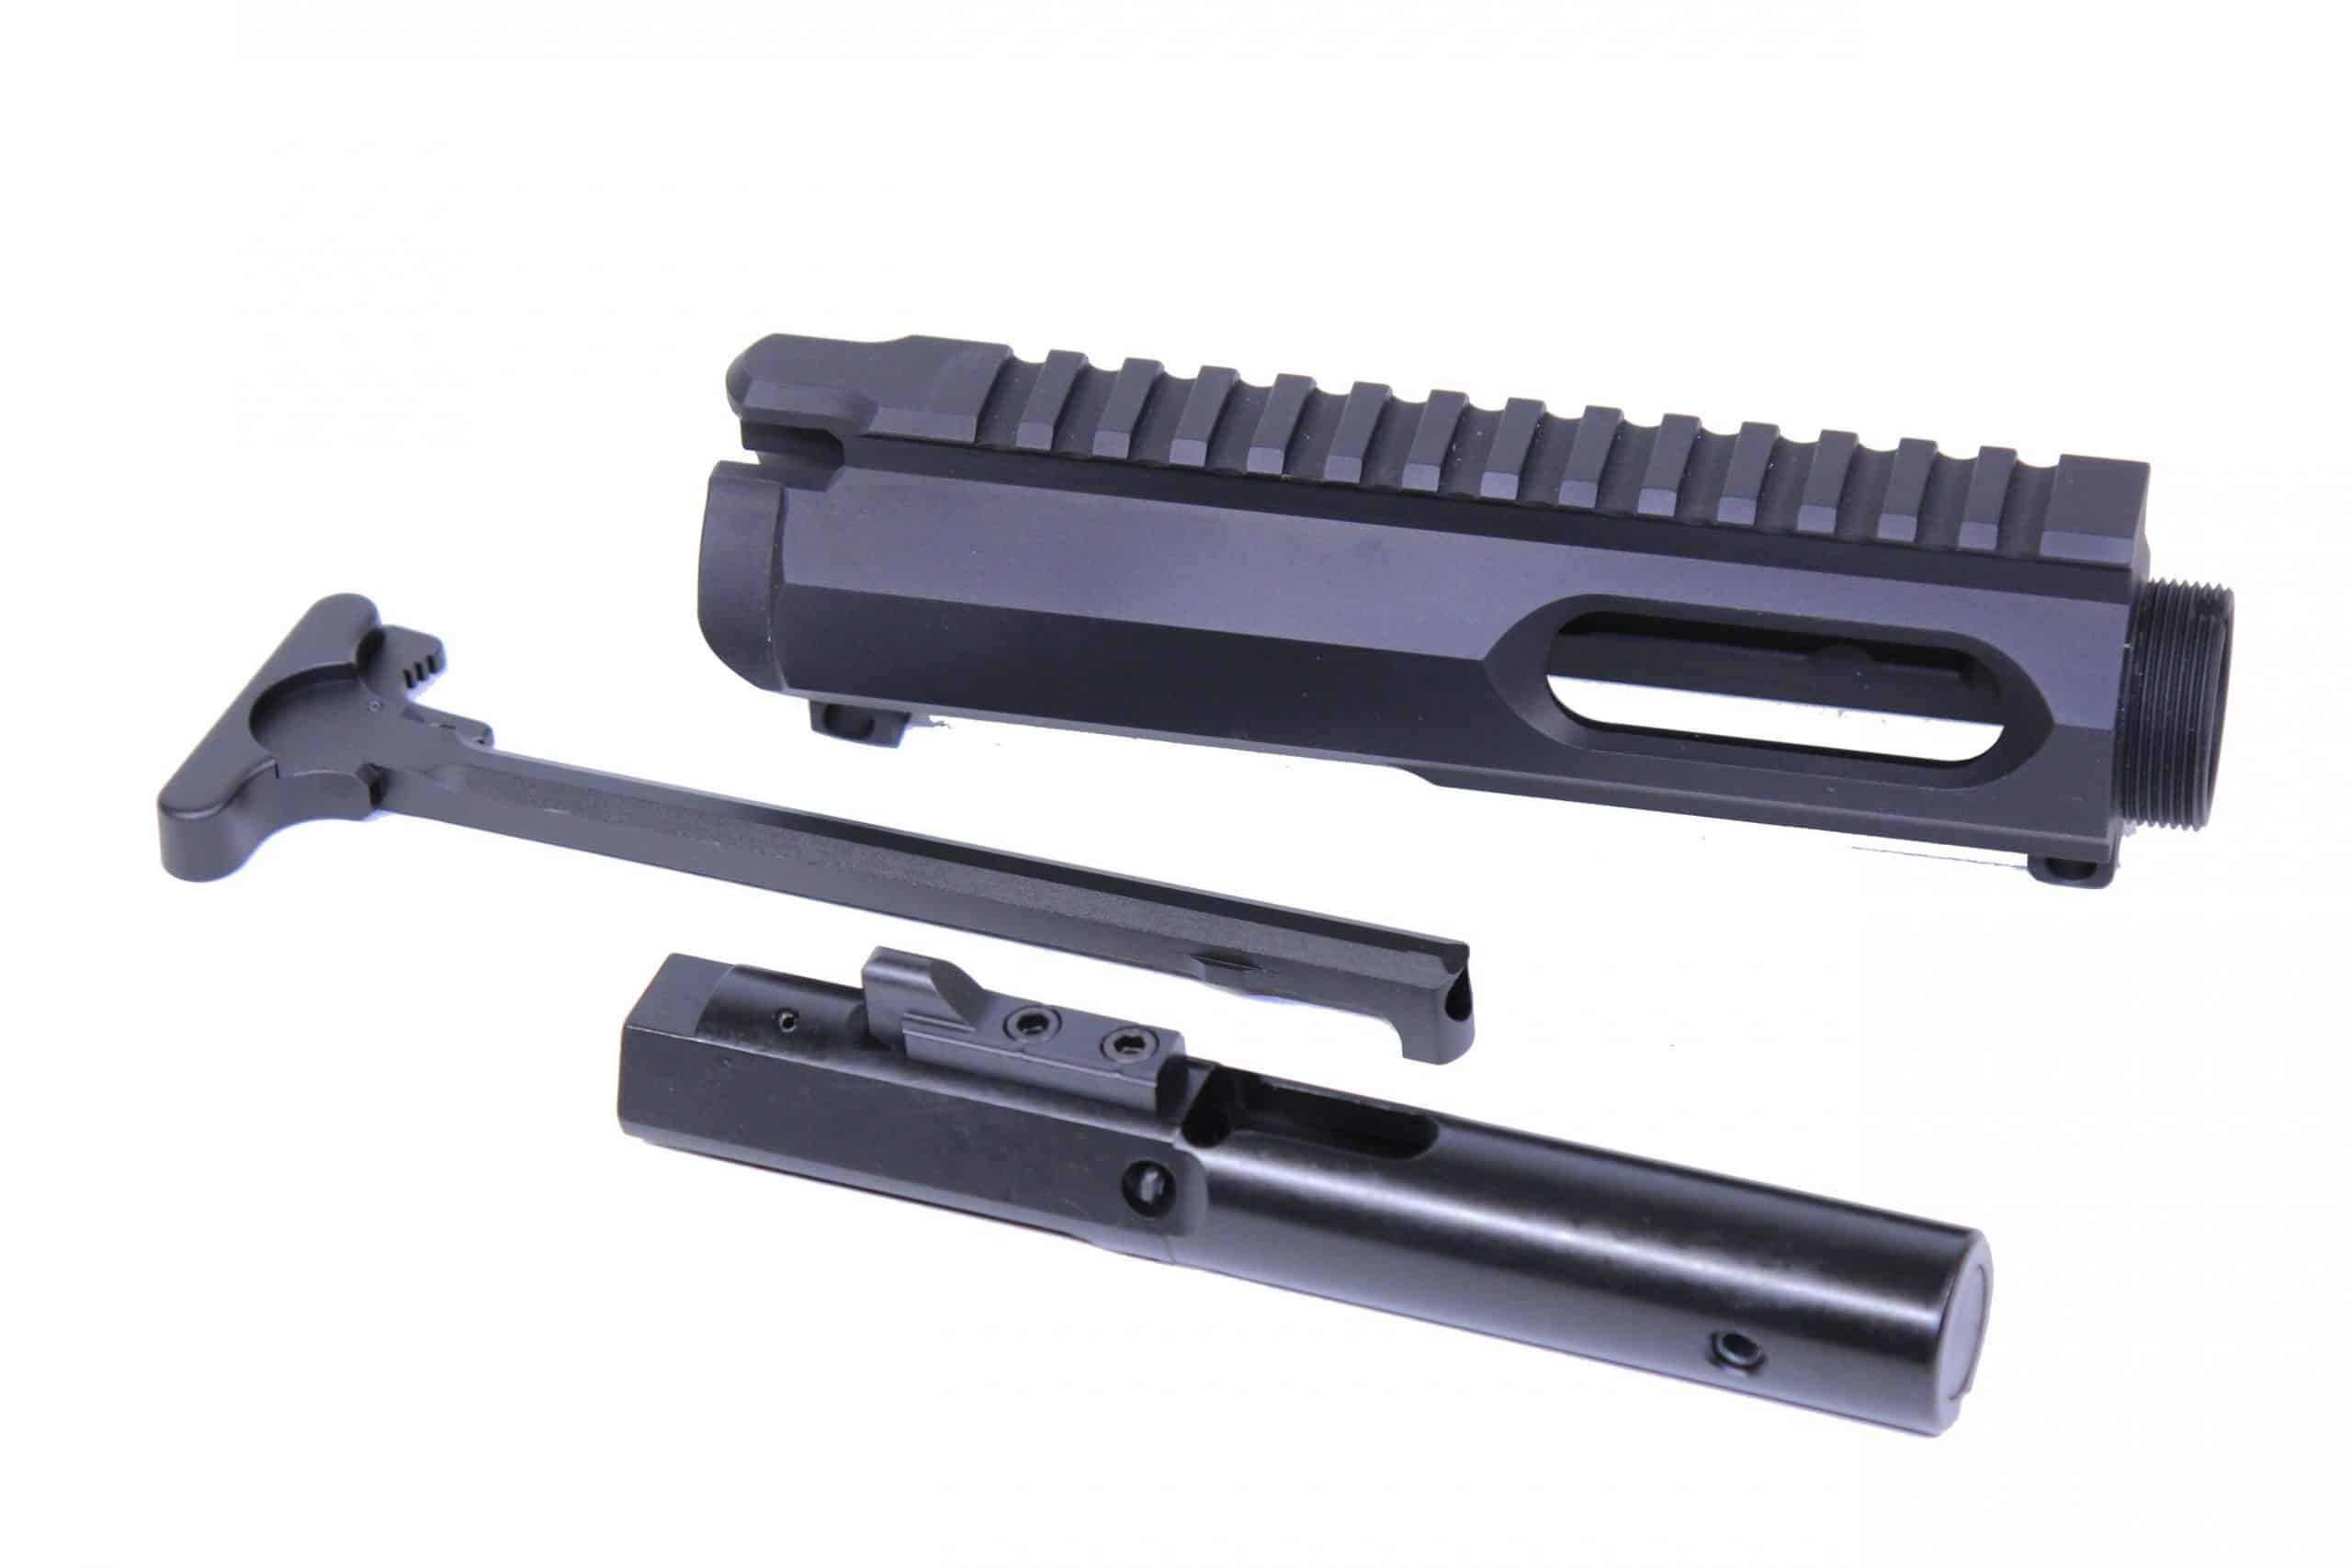 Guntec Usa Ar 15 9mm Cal Complete Upper Receiver Combo Kit Tactical Transition